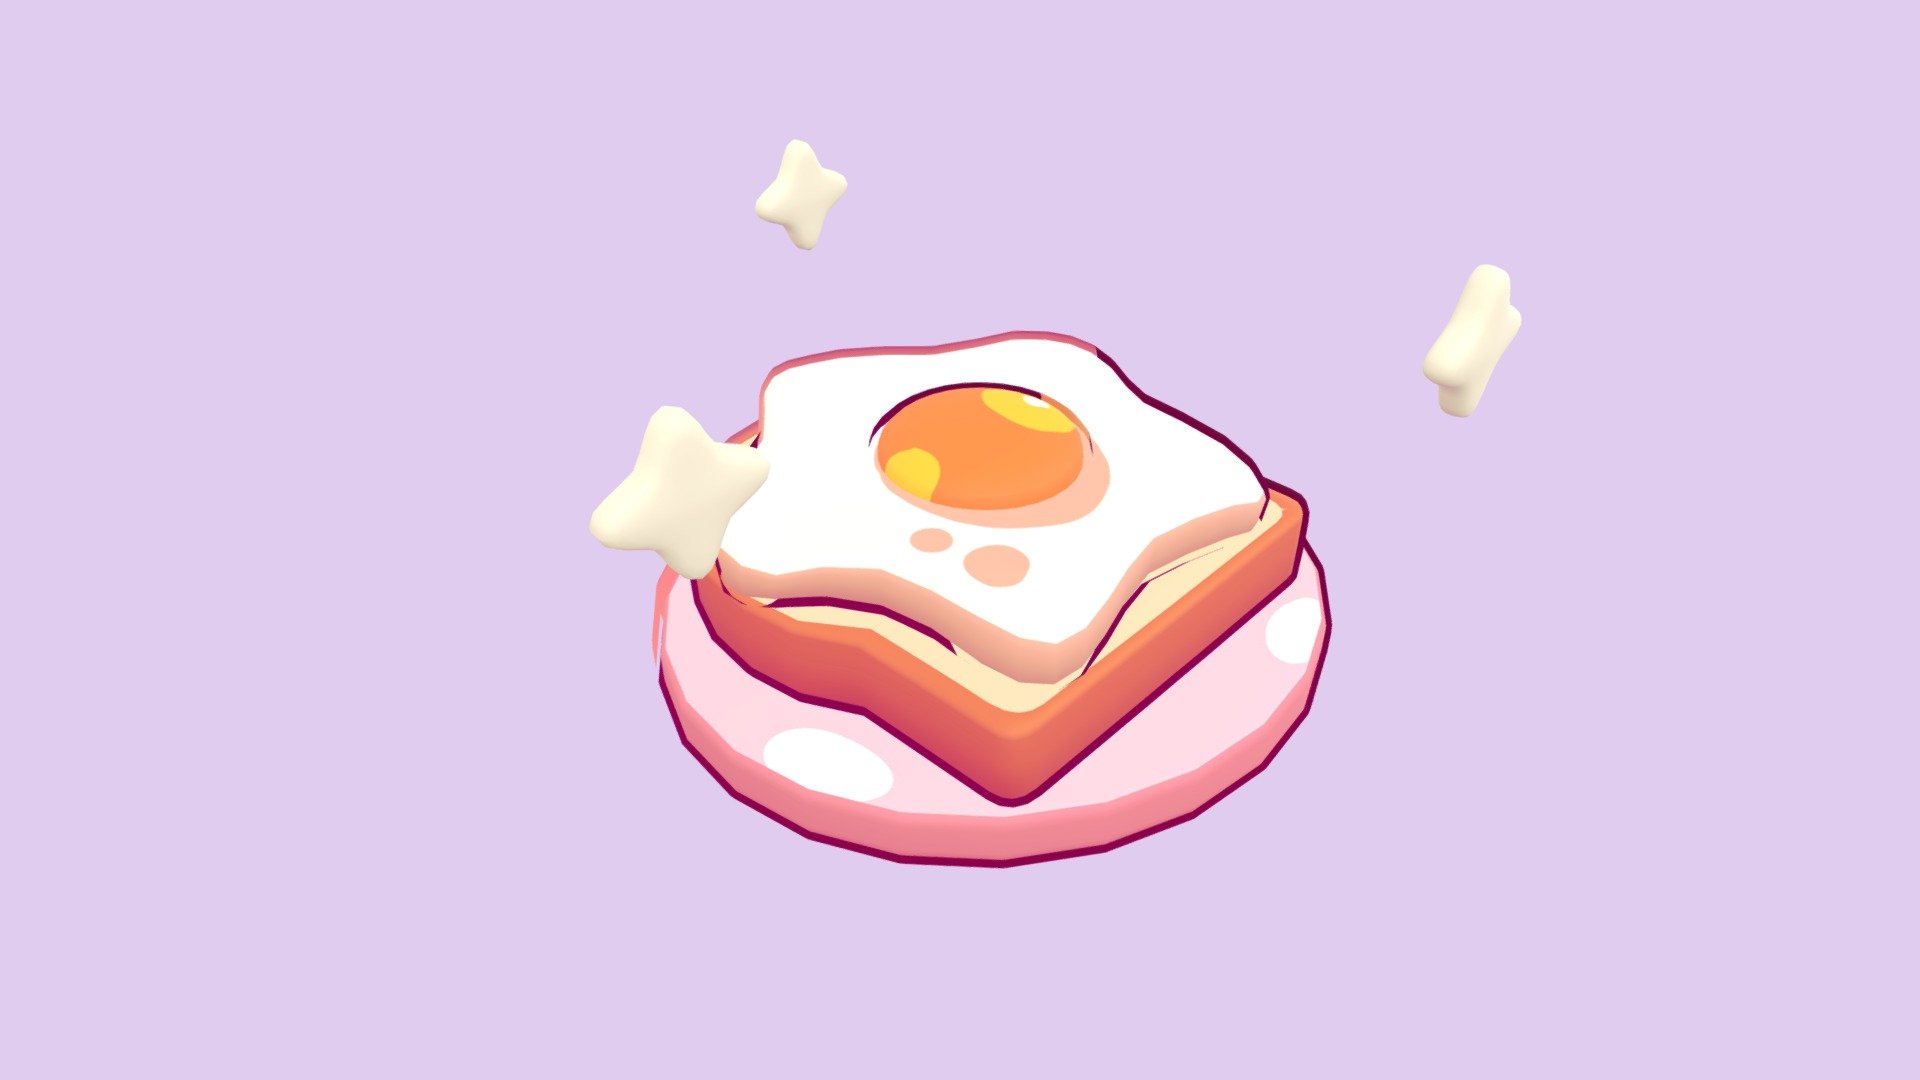 A quick model based on the desing of @stefscribbles on instagram. It's just an egg but a starry one :)

Check the cute art in the original post!

https://www.instagram.com/p/CvcLMYBKupN/?img_index=1 - Egg toast - 3D model by Tomoe_512 3d model